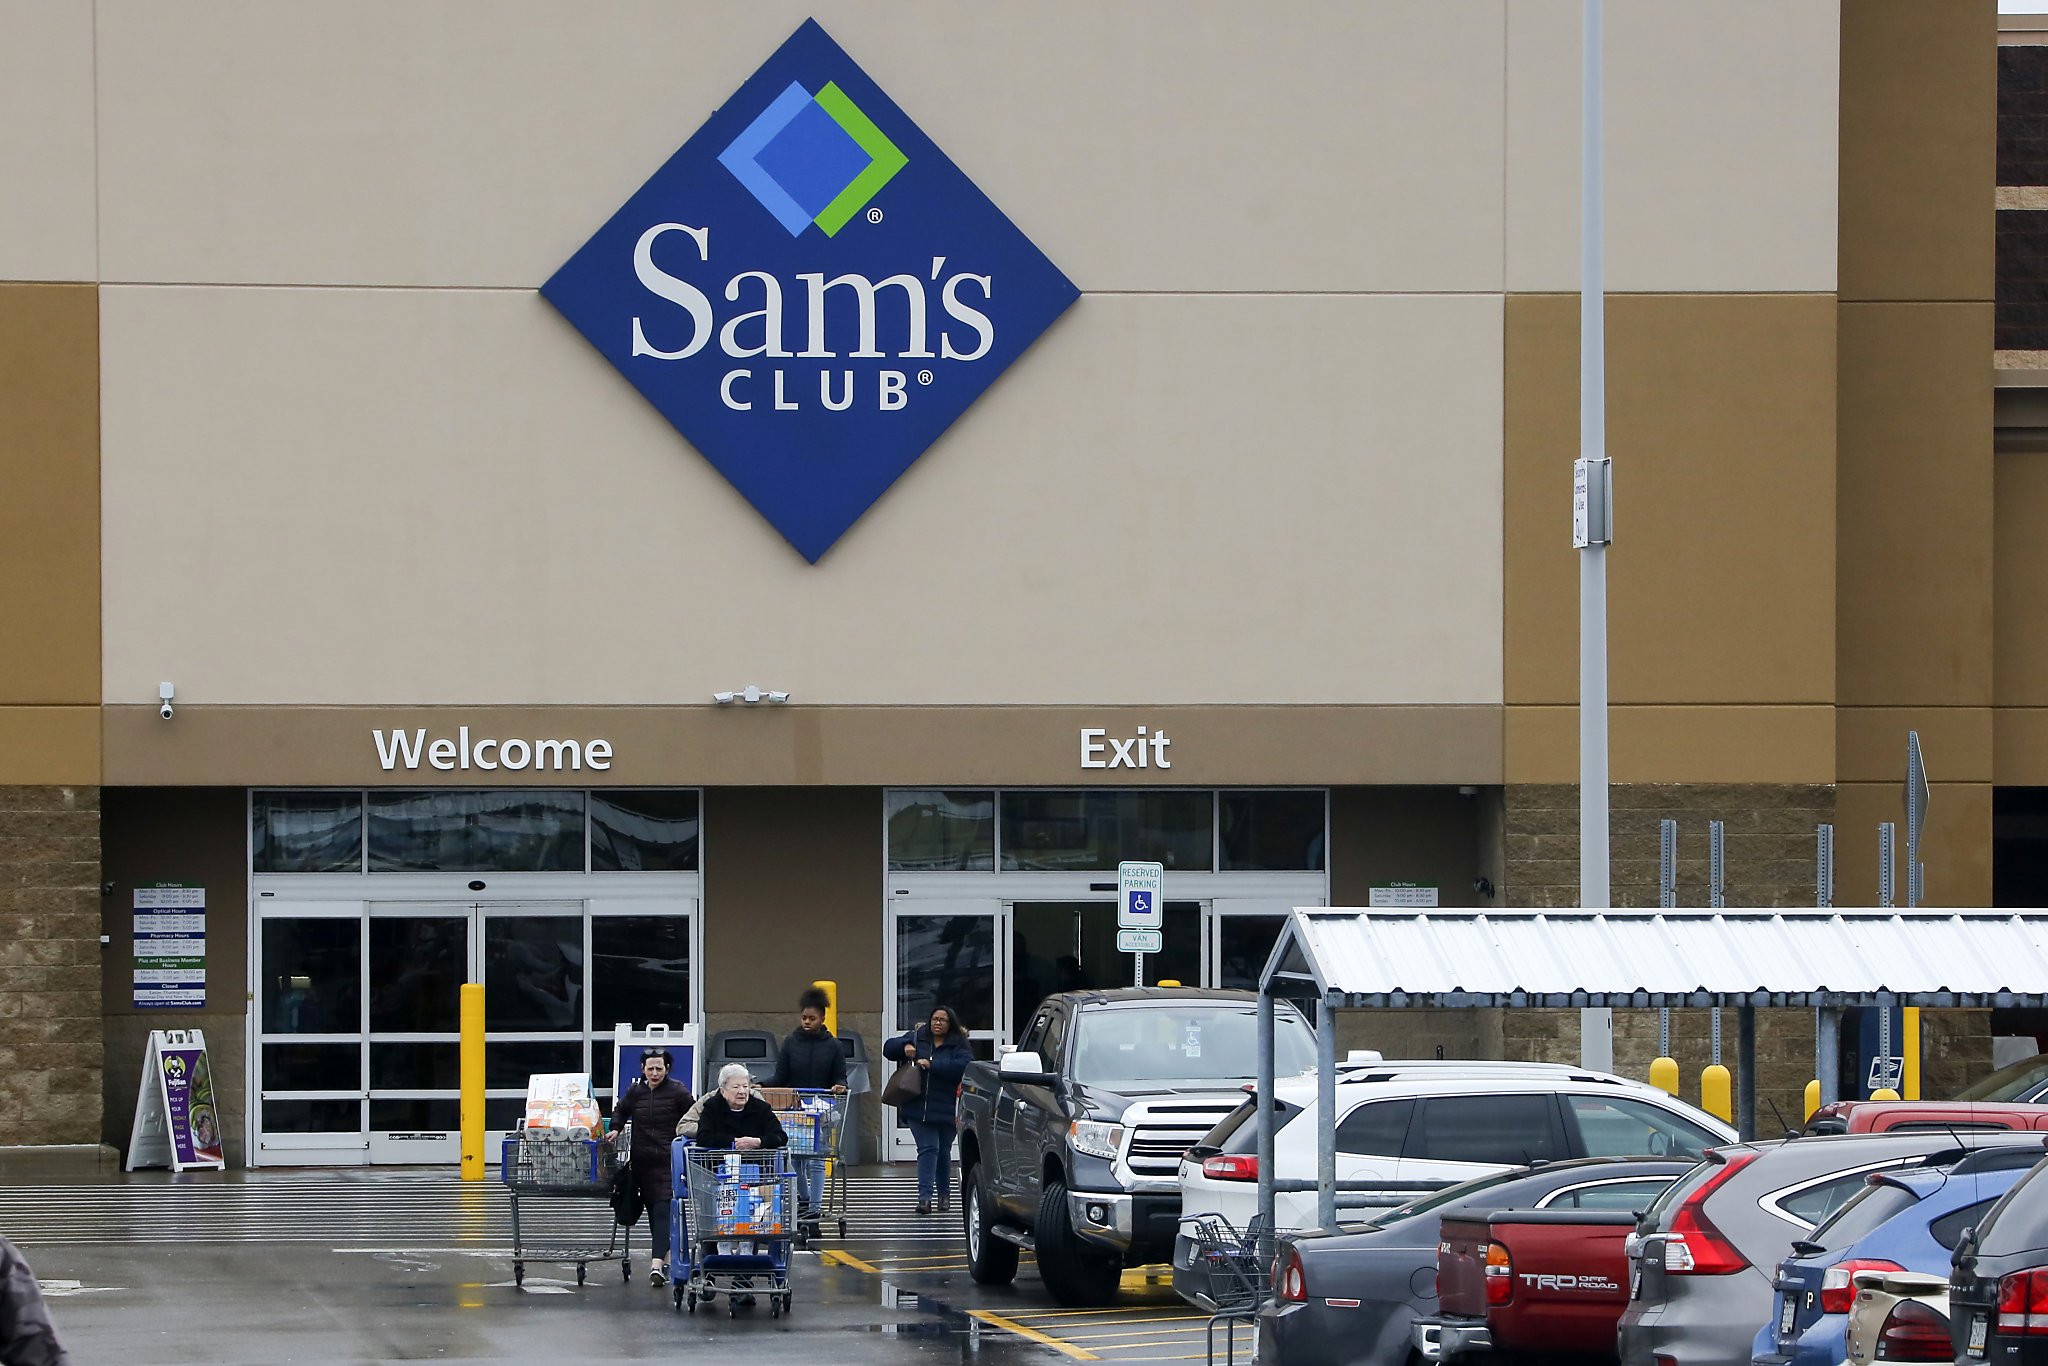 As Costco considers Albany, Sam's Club plans to add gas